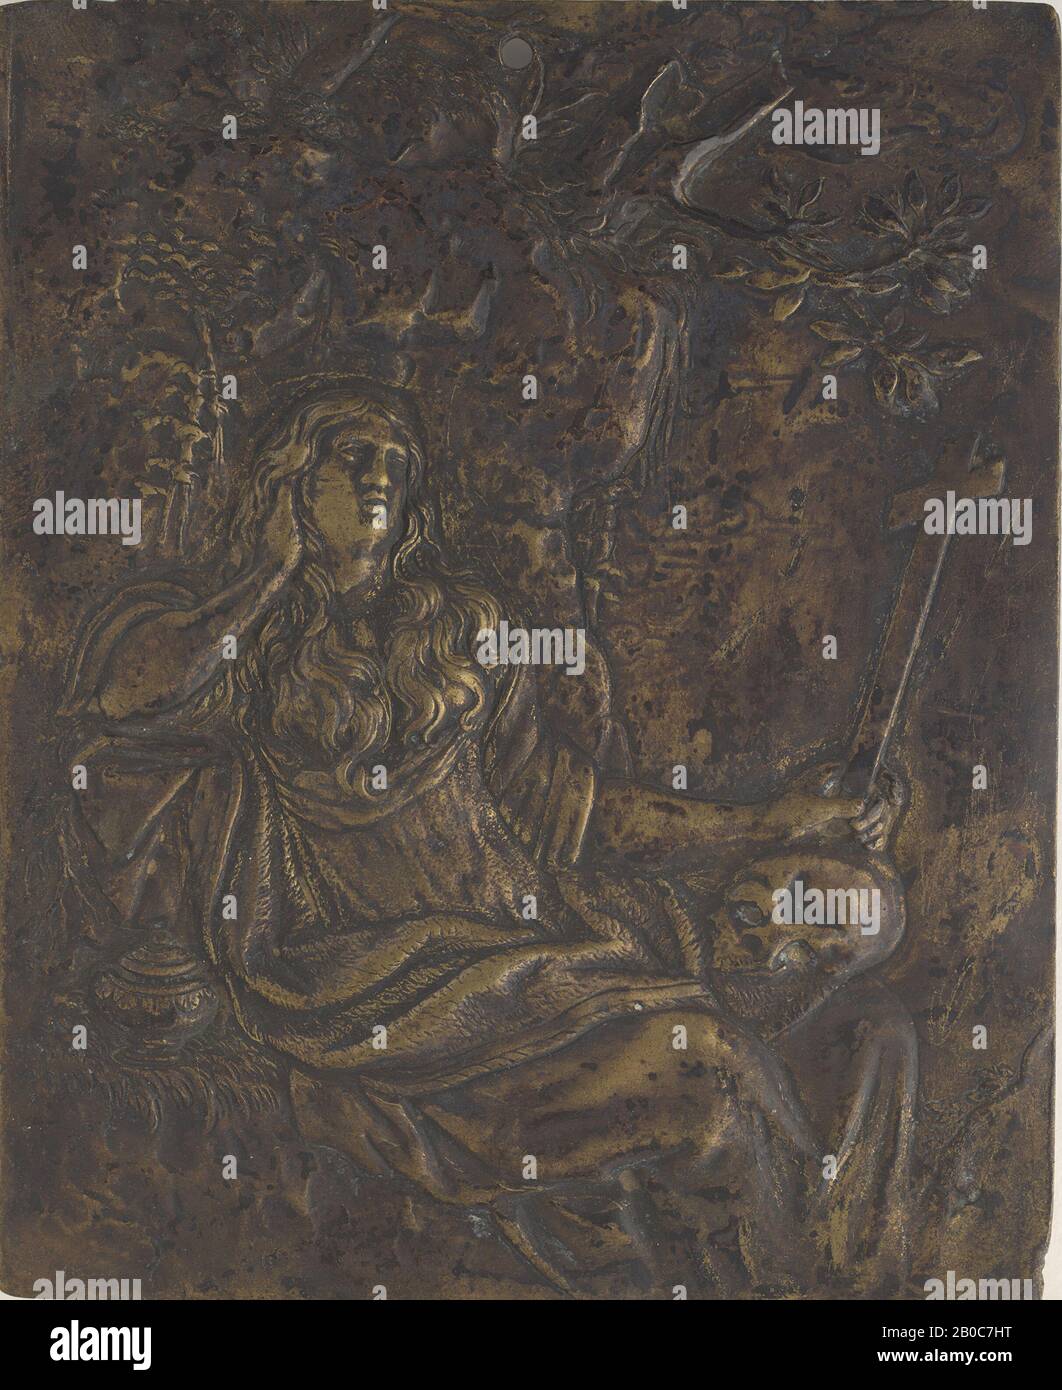 Unknown Artist, The Repentant Magdalene, n.d., bronze, 5 13/16 in. x 4 3/4 in. (14.7 cm. x 12 cm.) Stock Photo